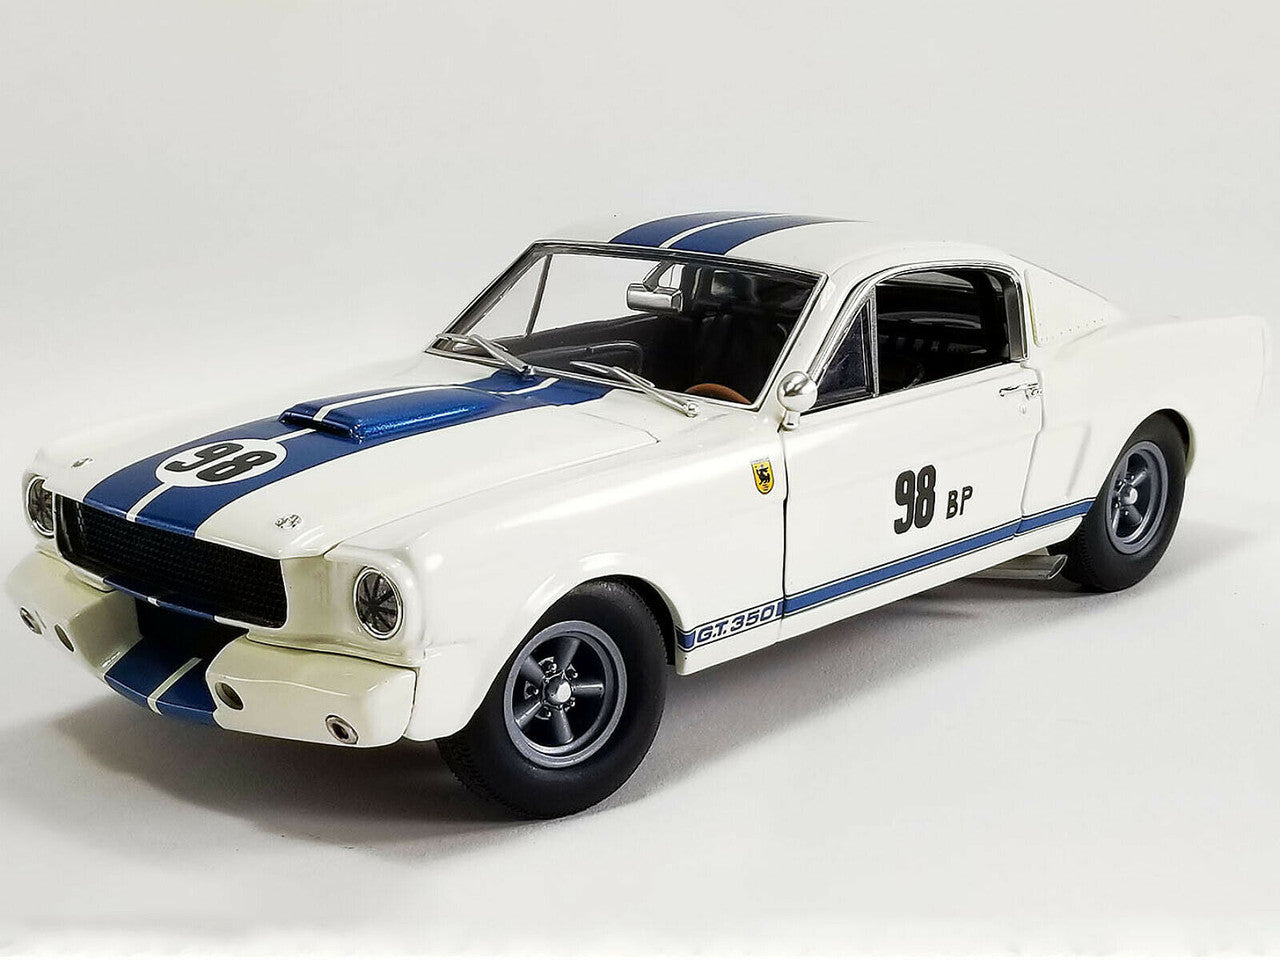 1/18 1965 Ford Mustang Shelby GT350R Prototype #98 Ken Miles 